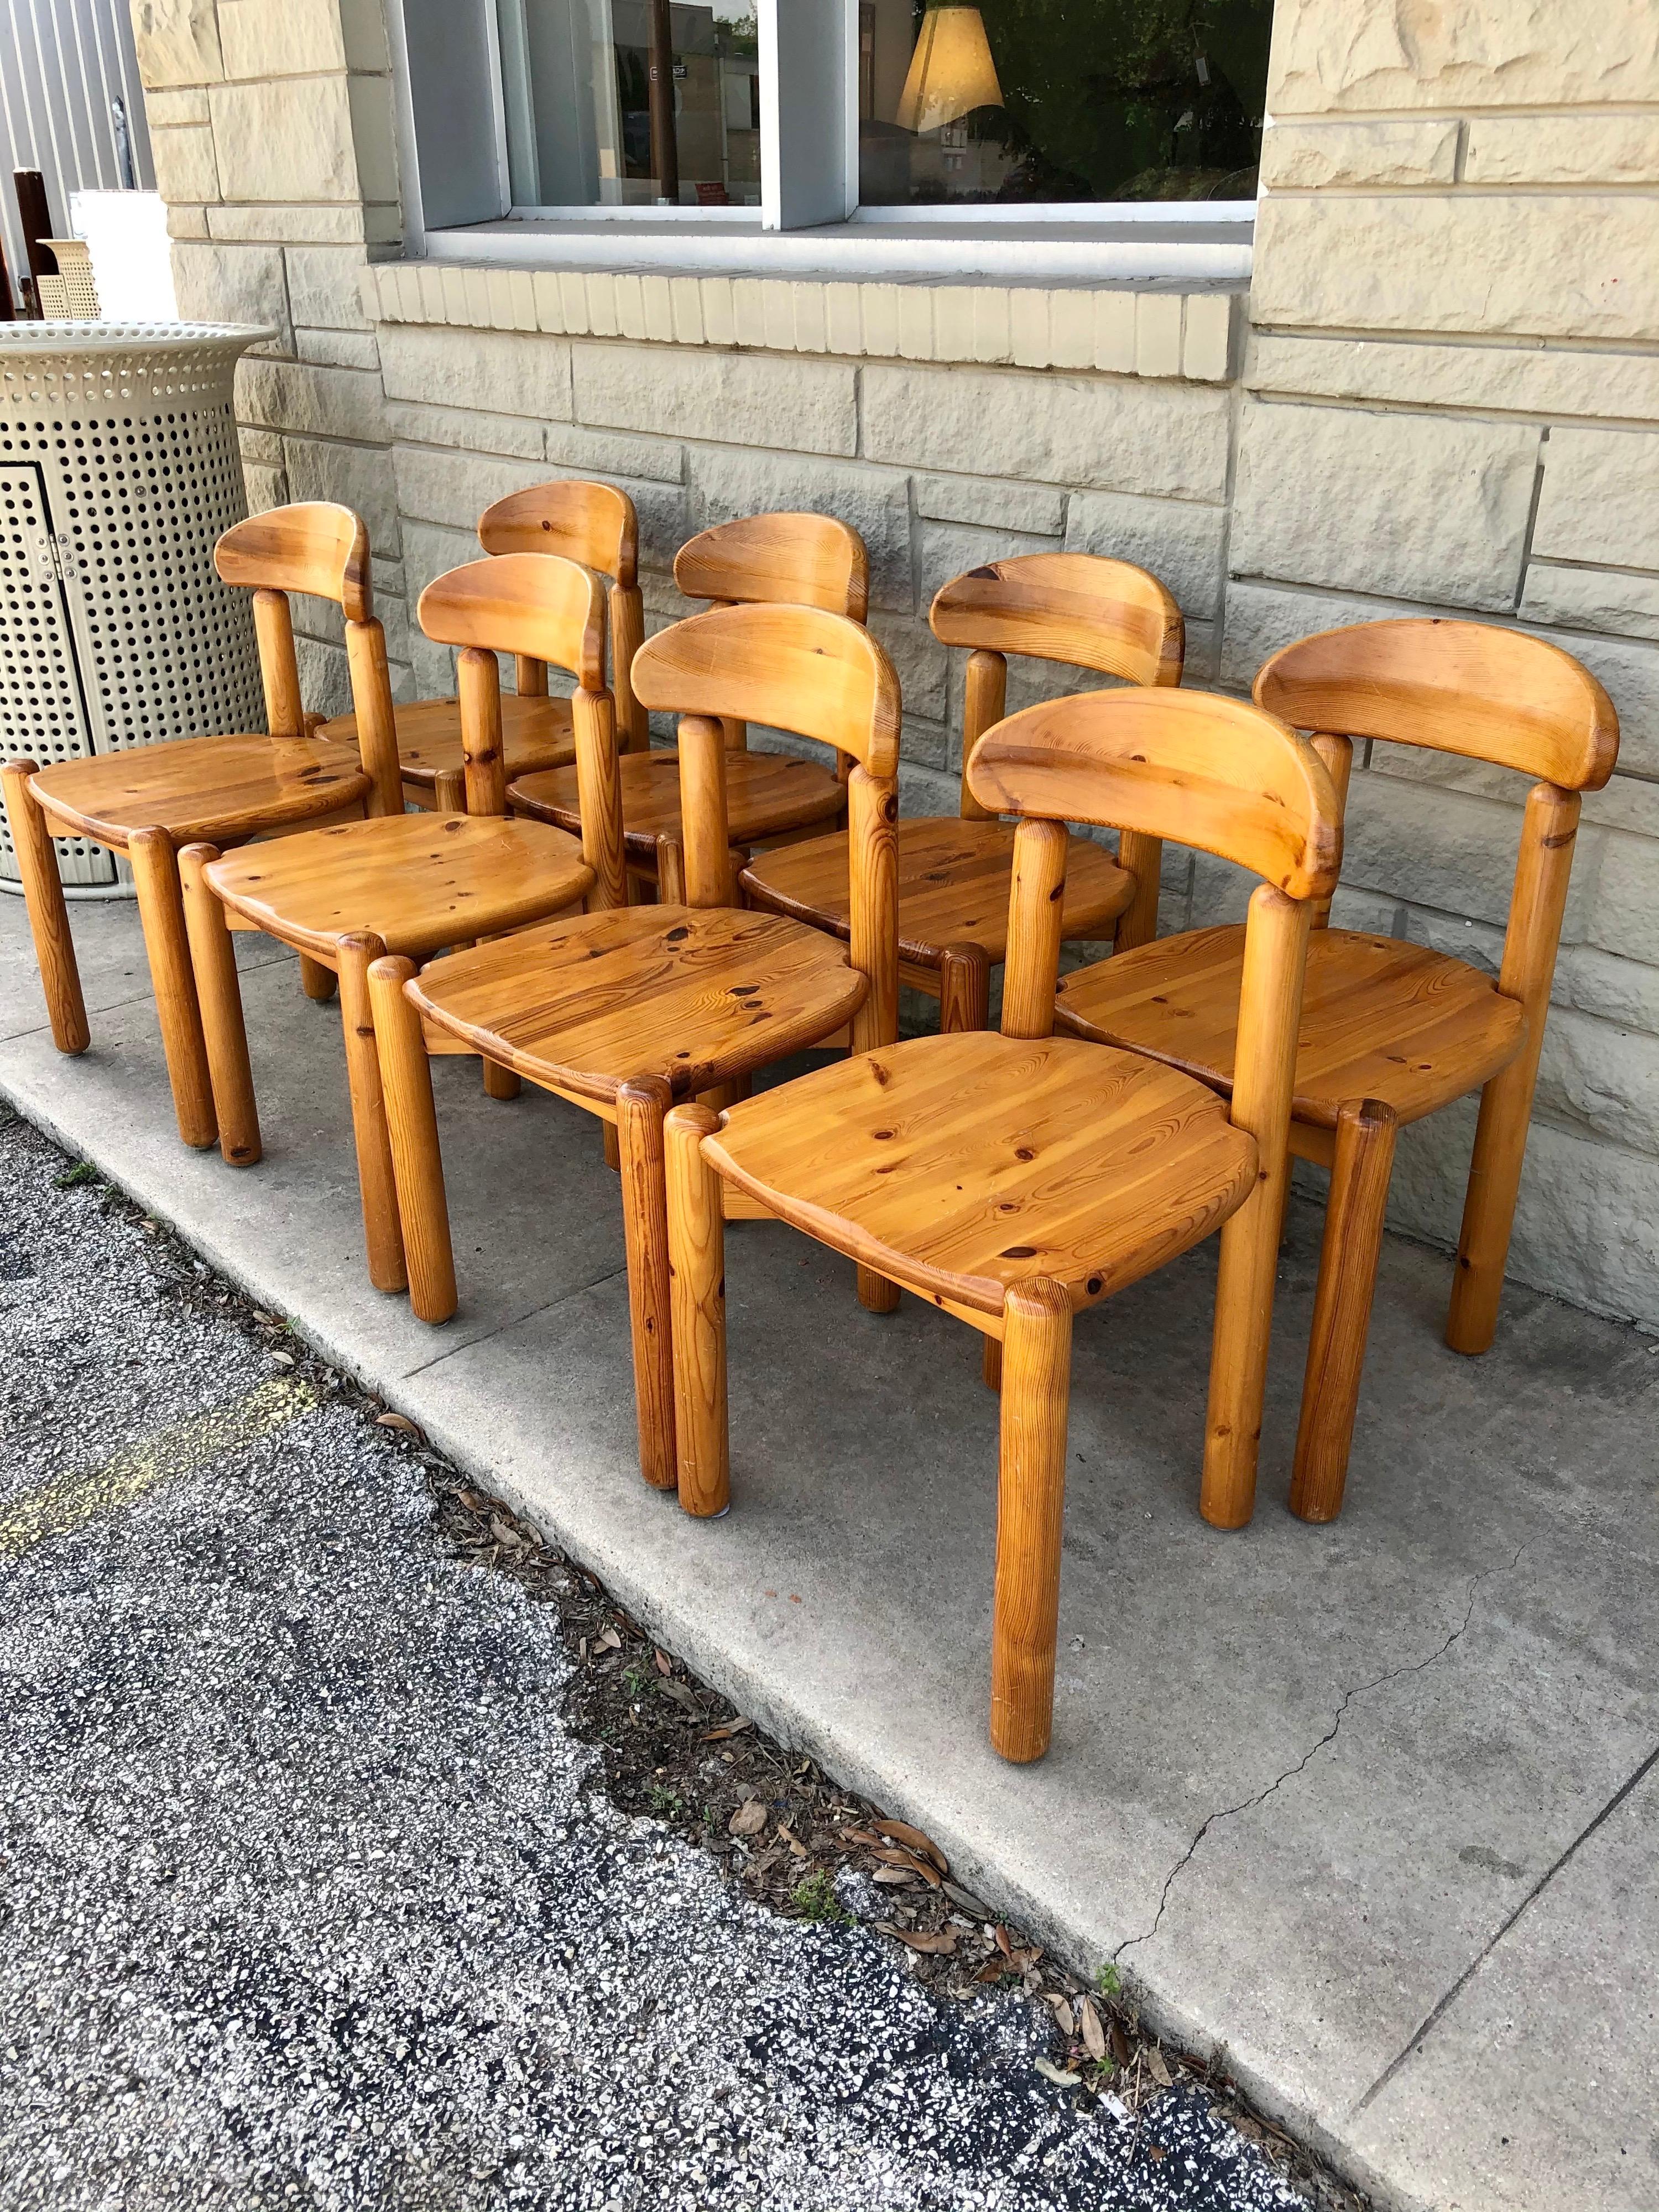 Danish Mid-Century Modern dining chairs in pine designed by Rainer Daumiller have a carved seat and backrest. Rainer's designs were sculptural as well as functional. The set of 8 dining chairs are in good condition' wear is consistent with age.